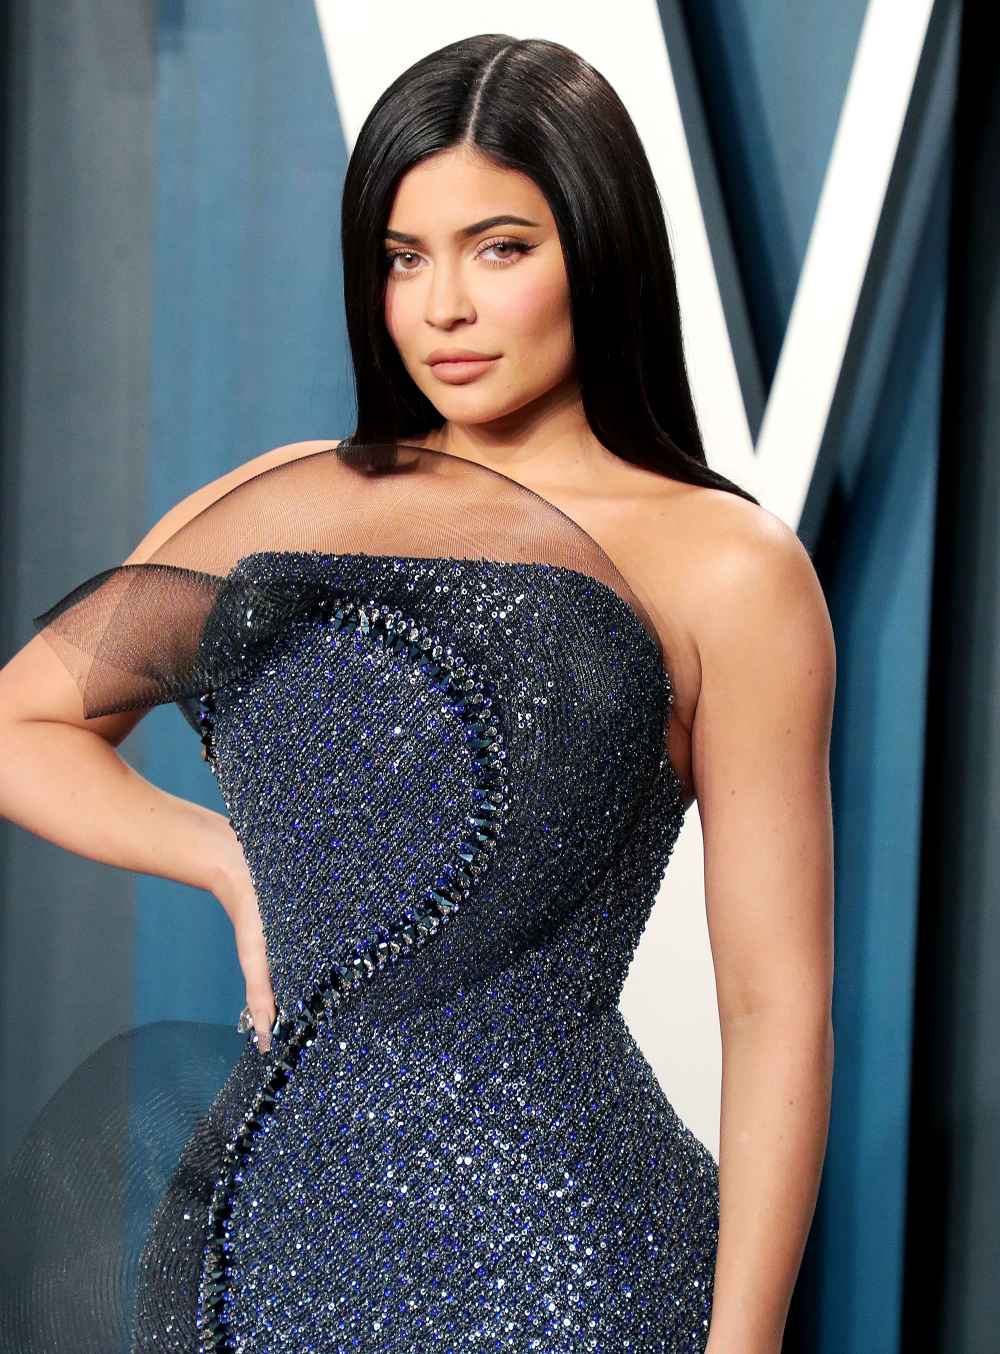 Kylie Jenner Wears 23 Embellished Dress For Her 23rd Birthday Usweekly